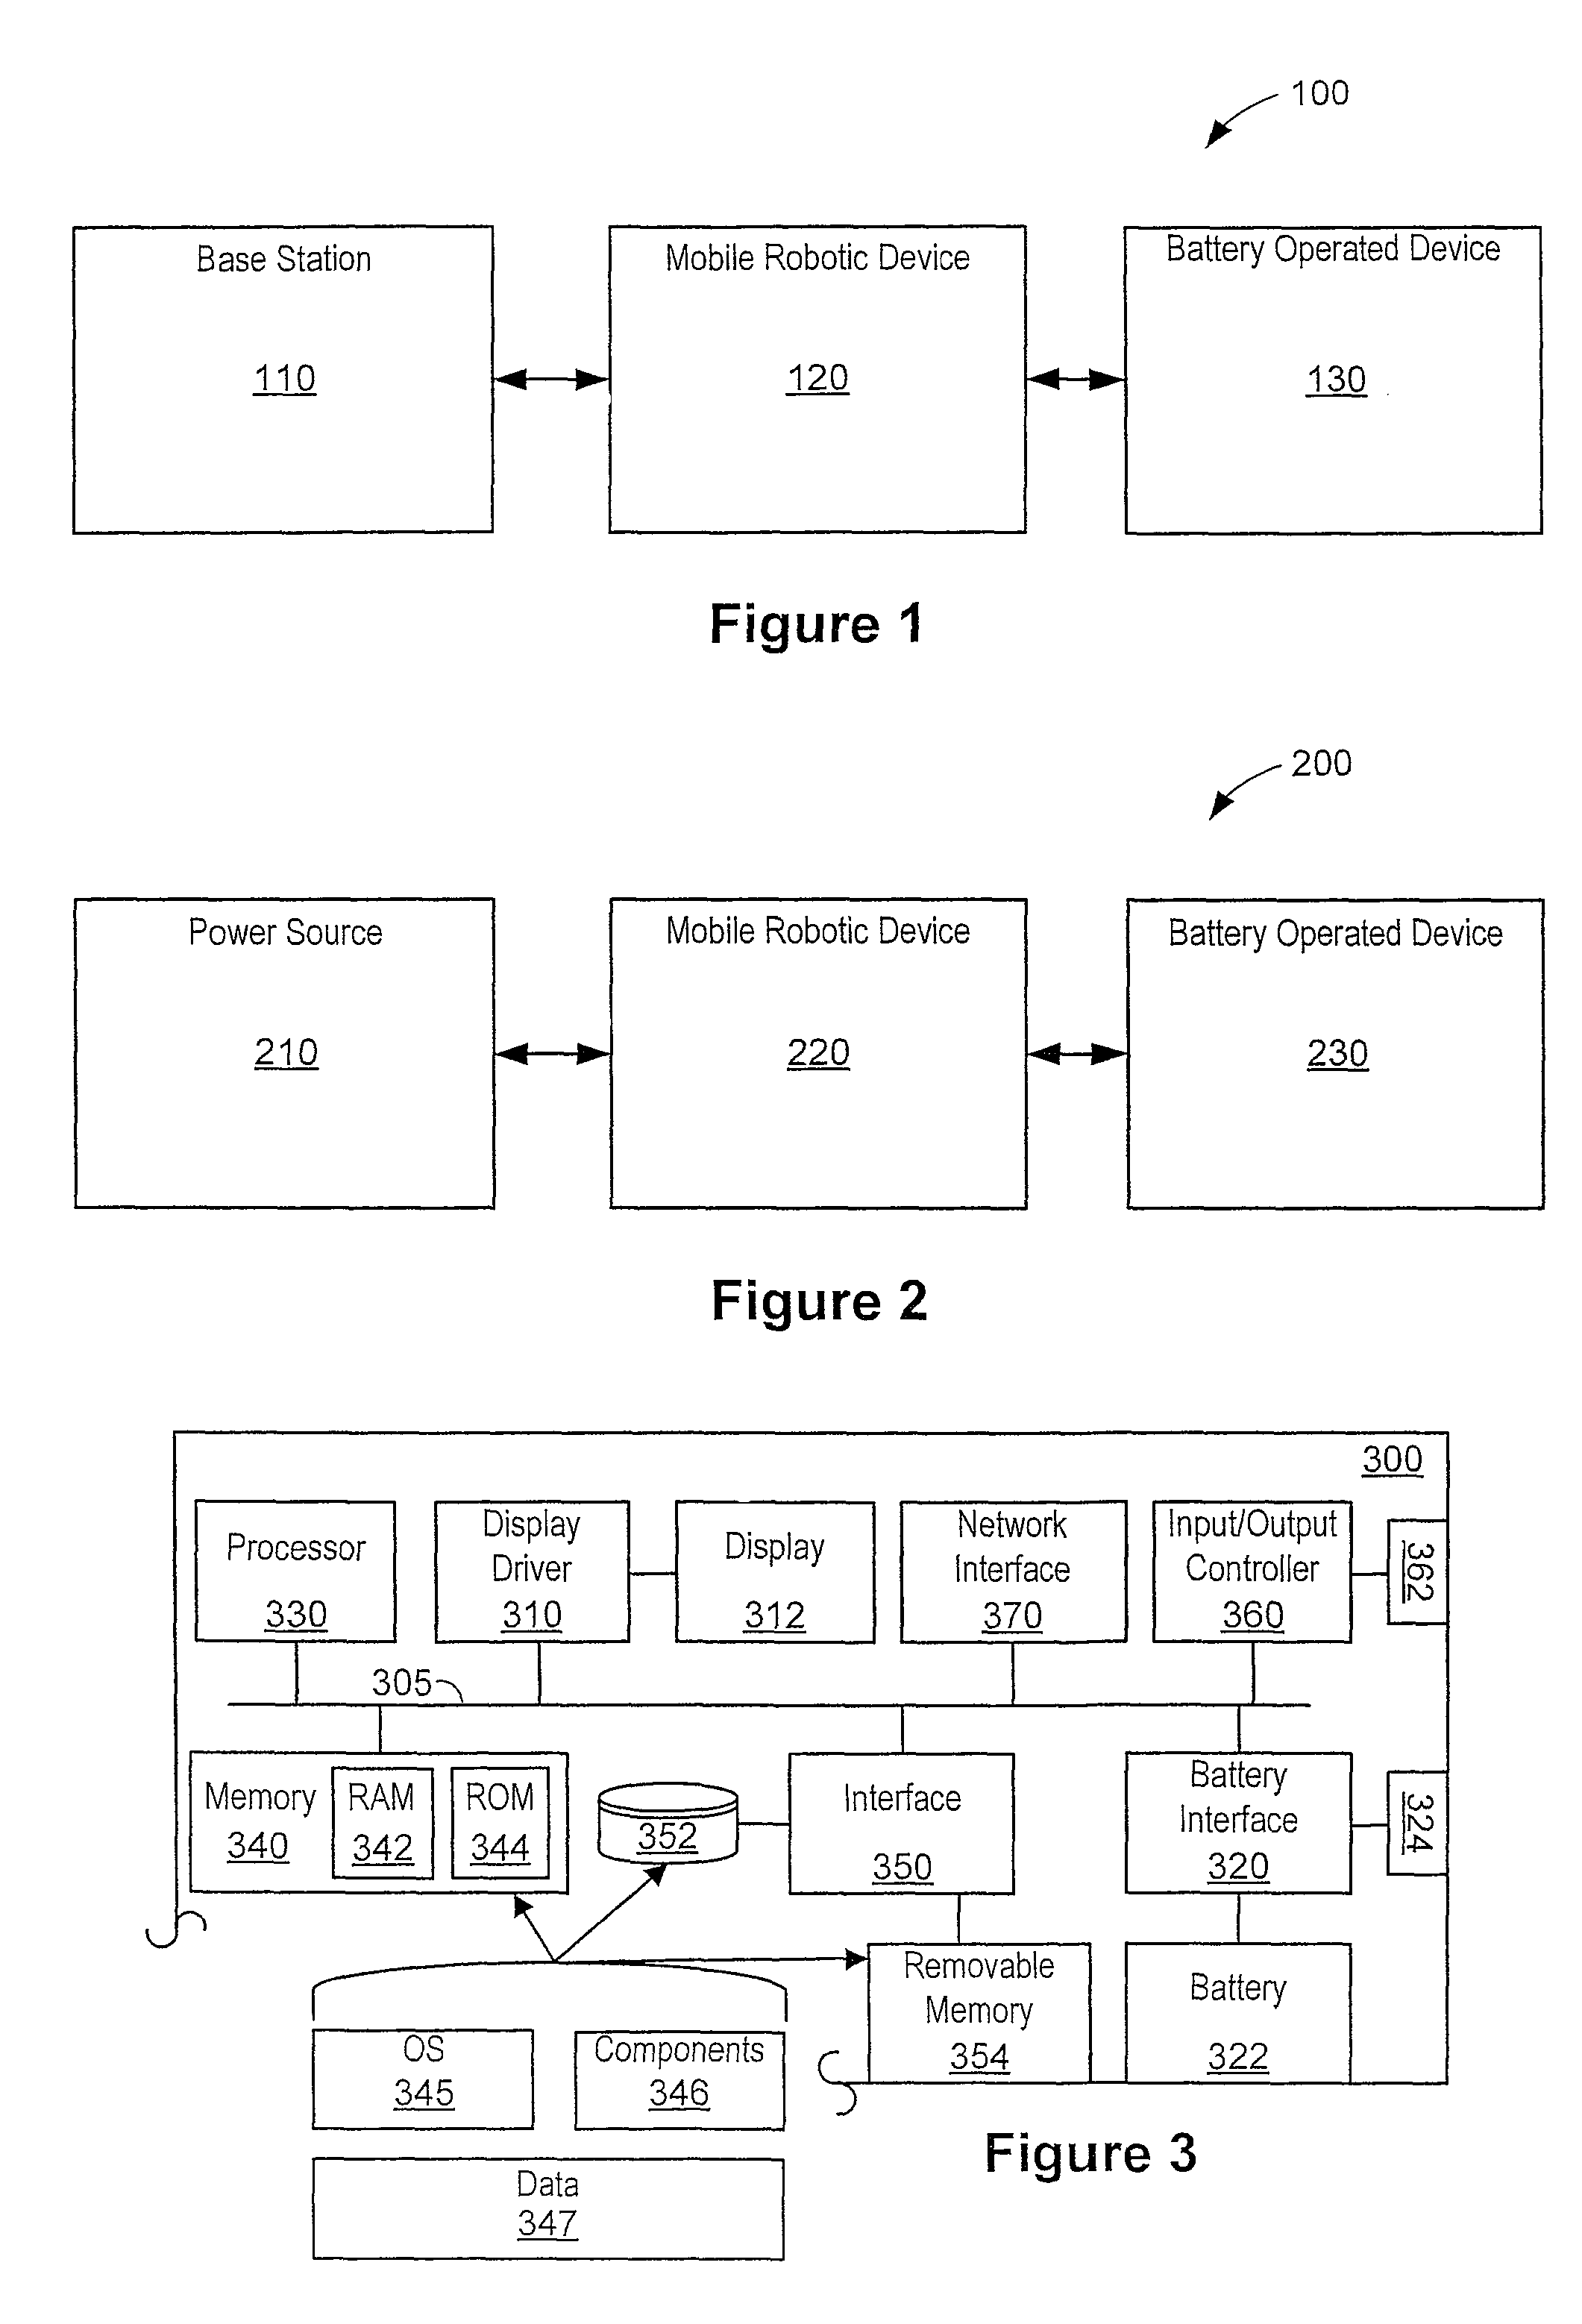 Automated battery and data delivery system